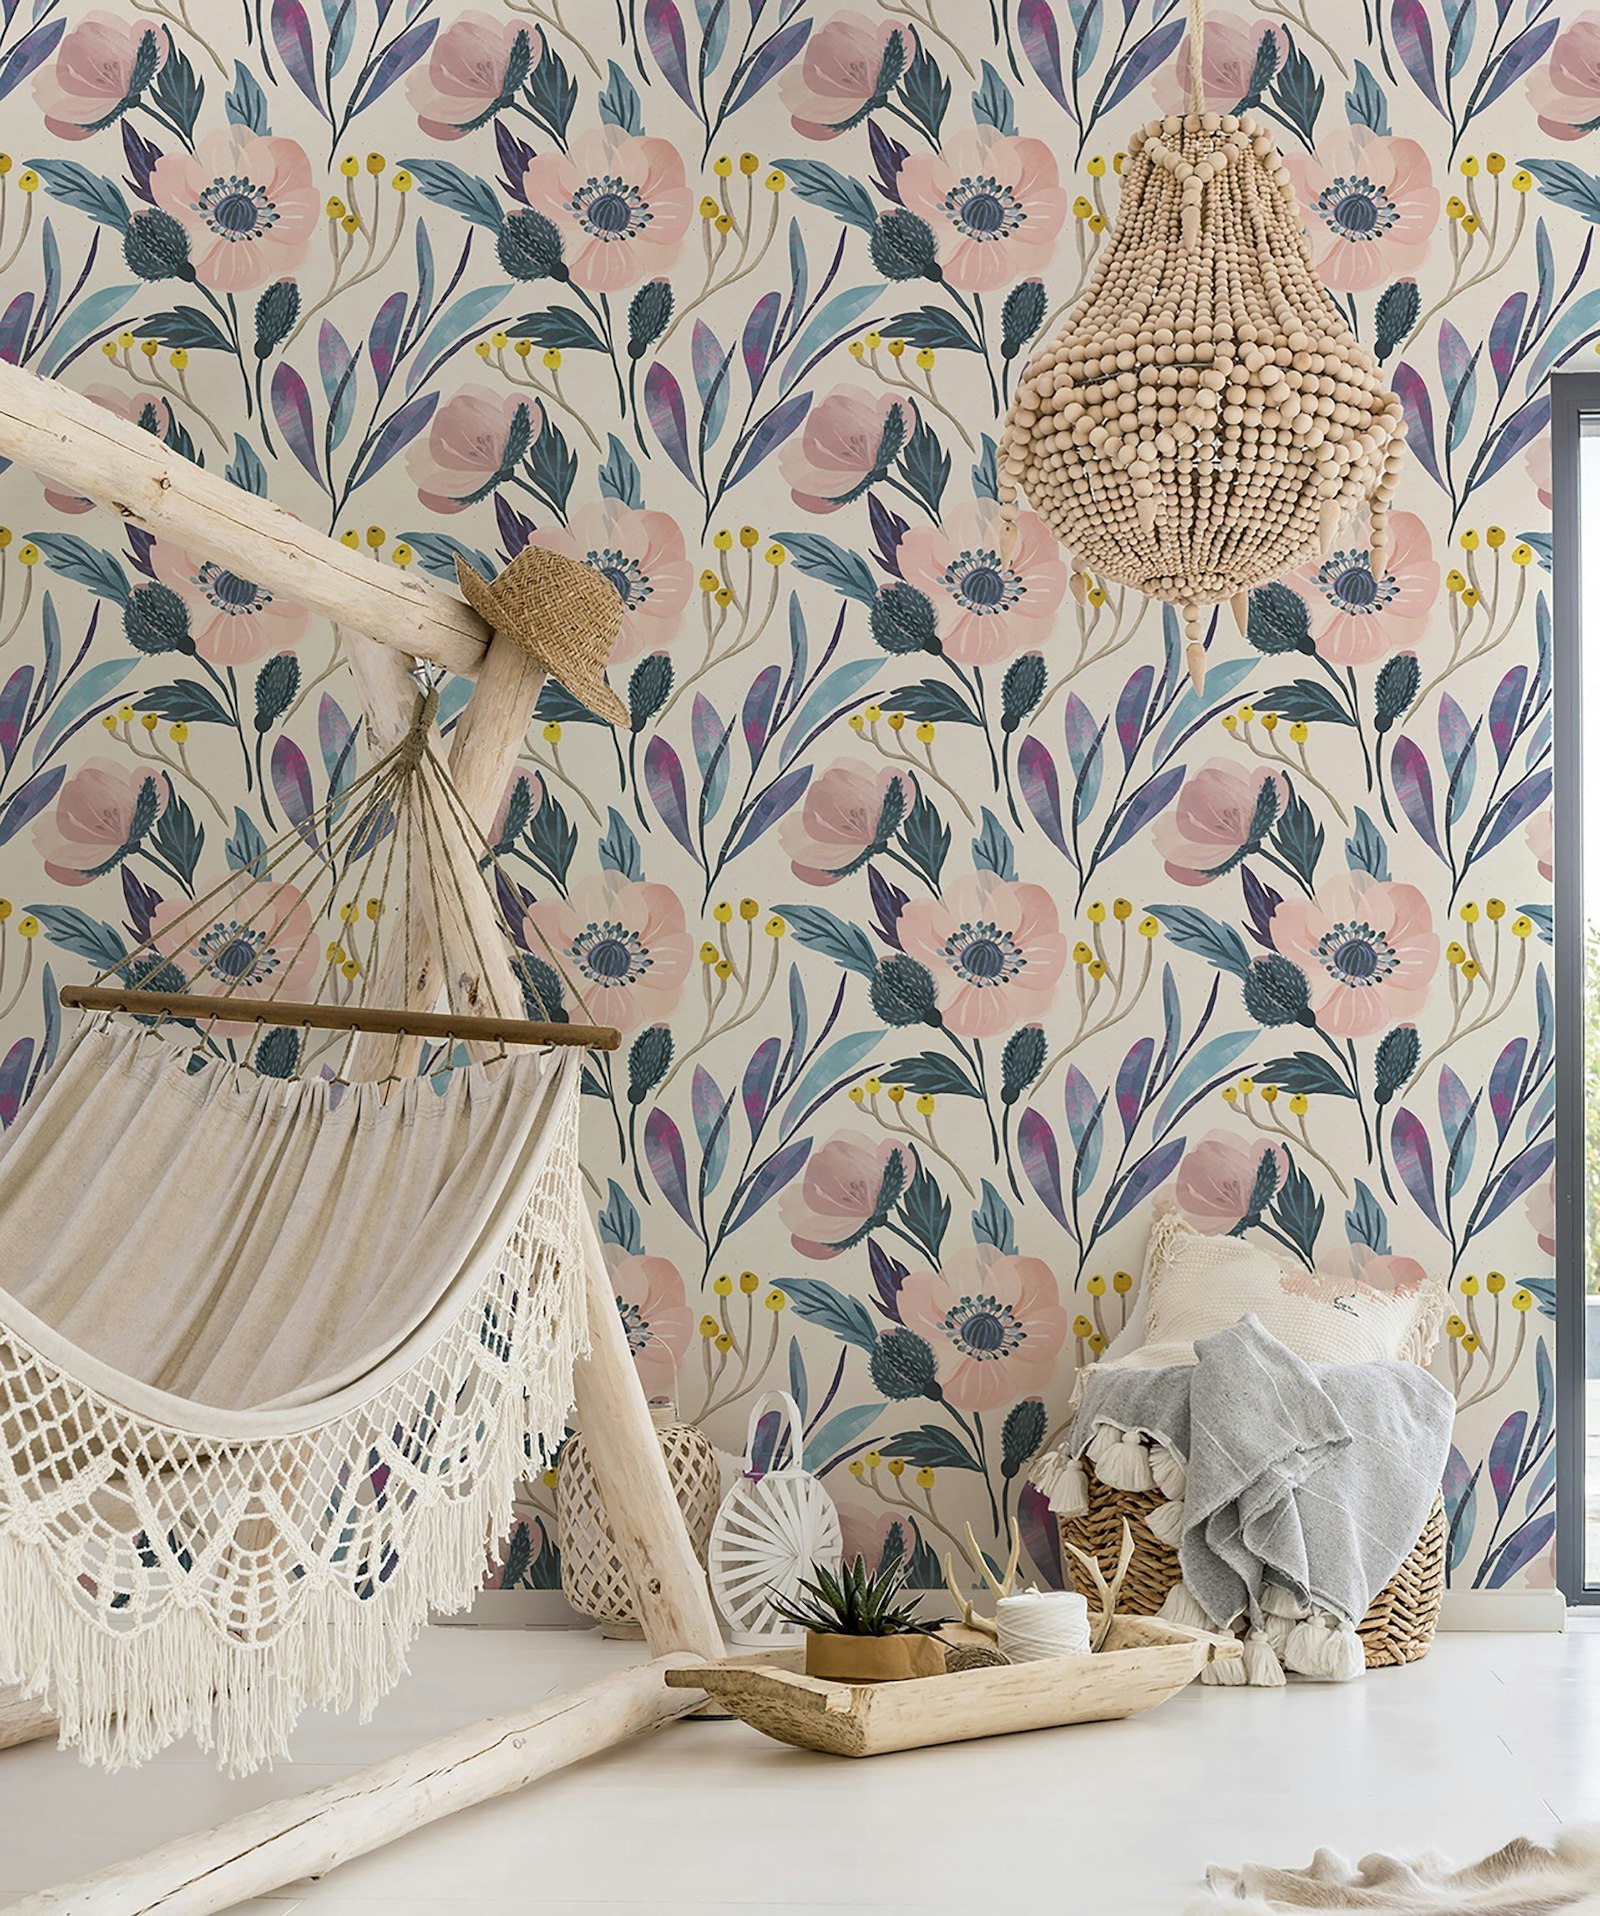 How to Hang Art without Damaging Wallpaper - at home with Ashley